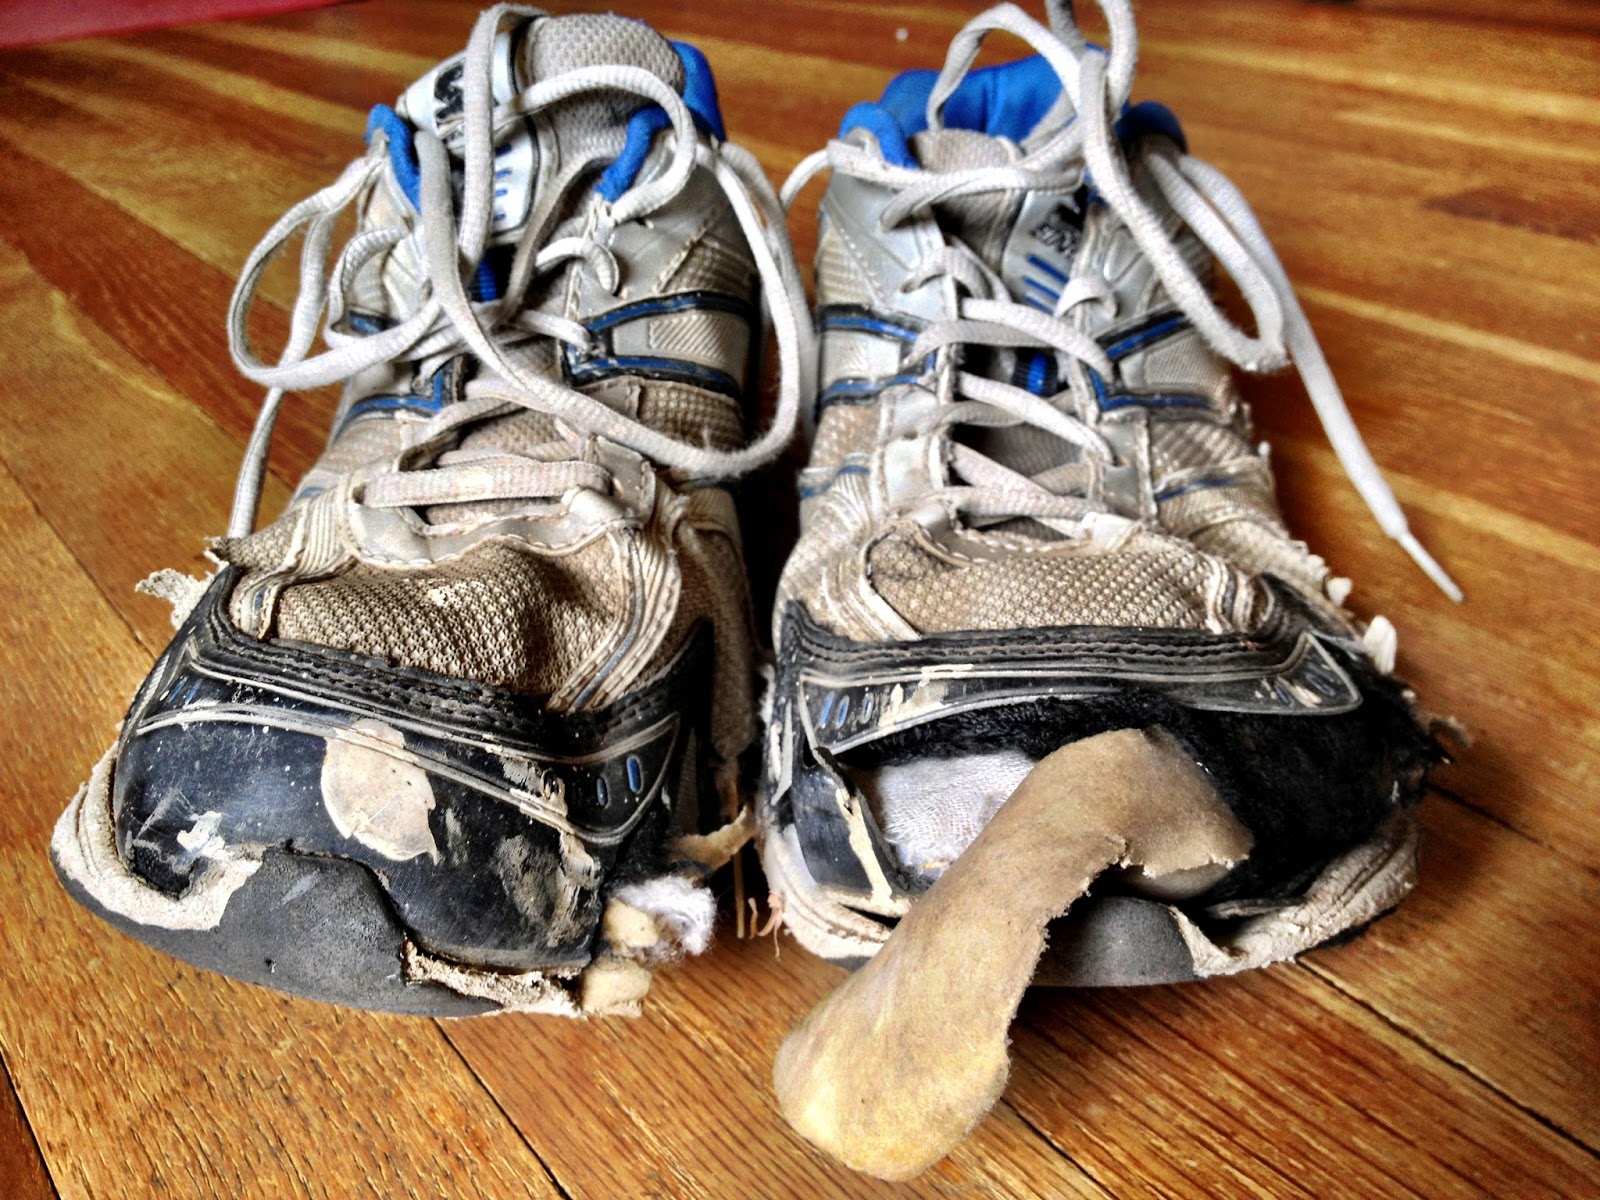 Outside the Rat Race: I Think It's Time For a New Pair of Shoes